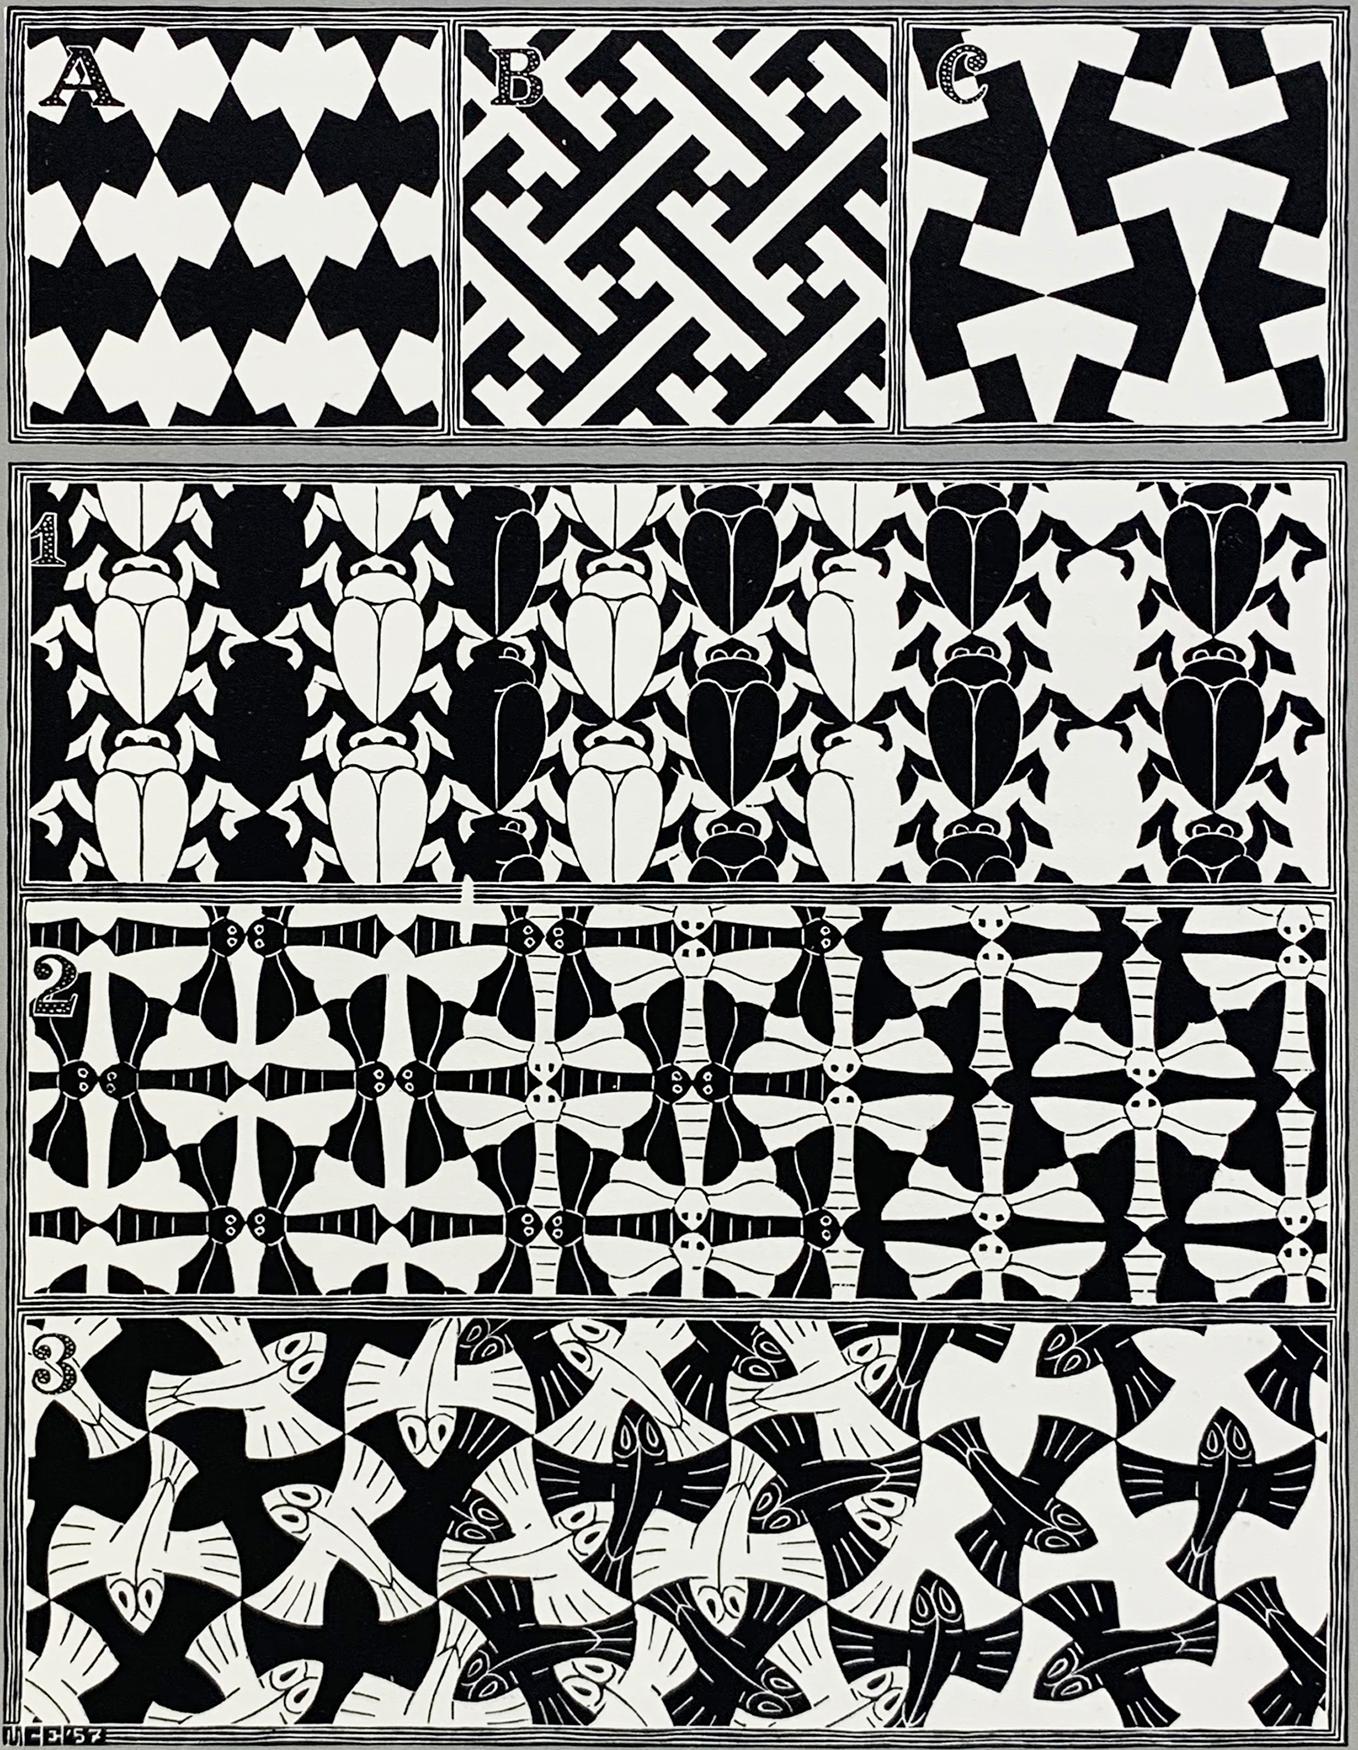 Regular Division of the Plane II "ABC" - Print by M.C. Escher